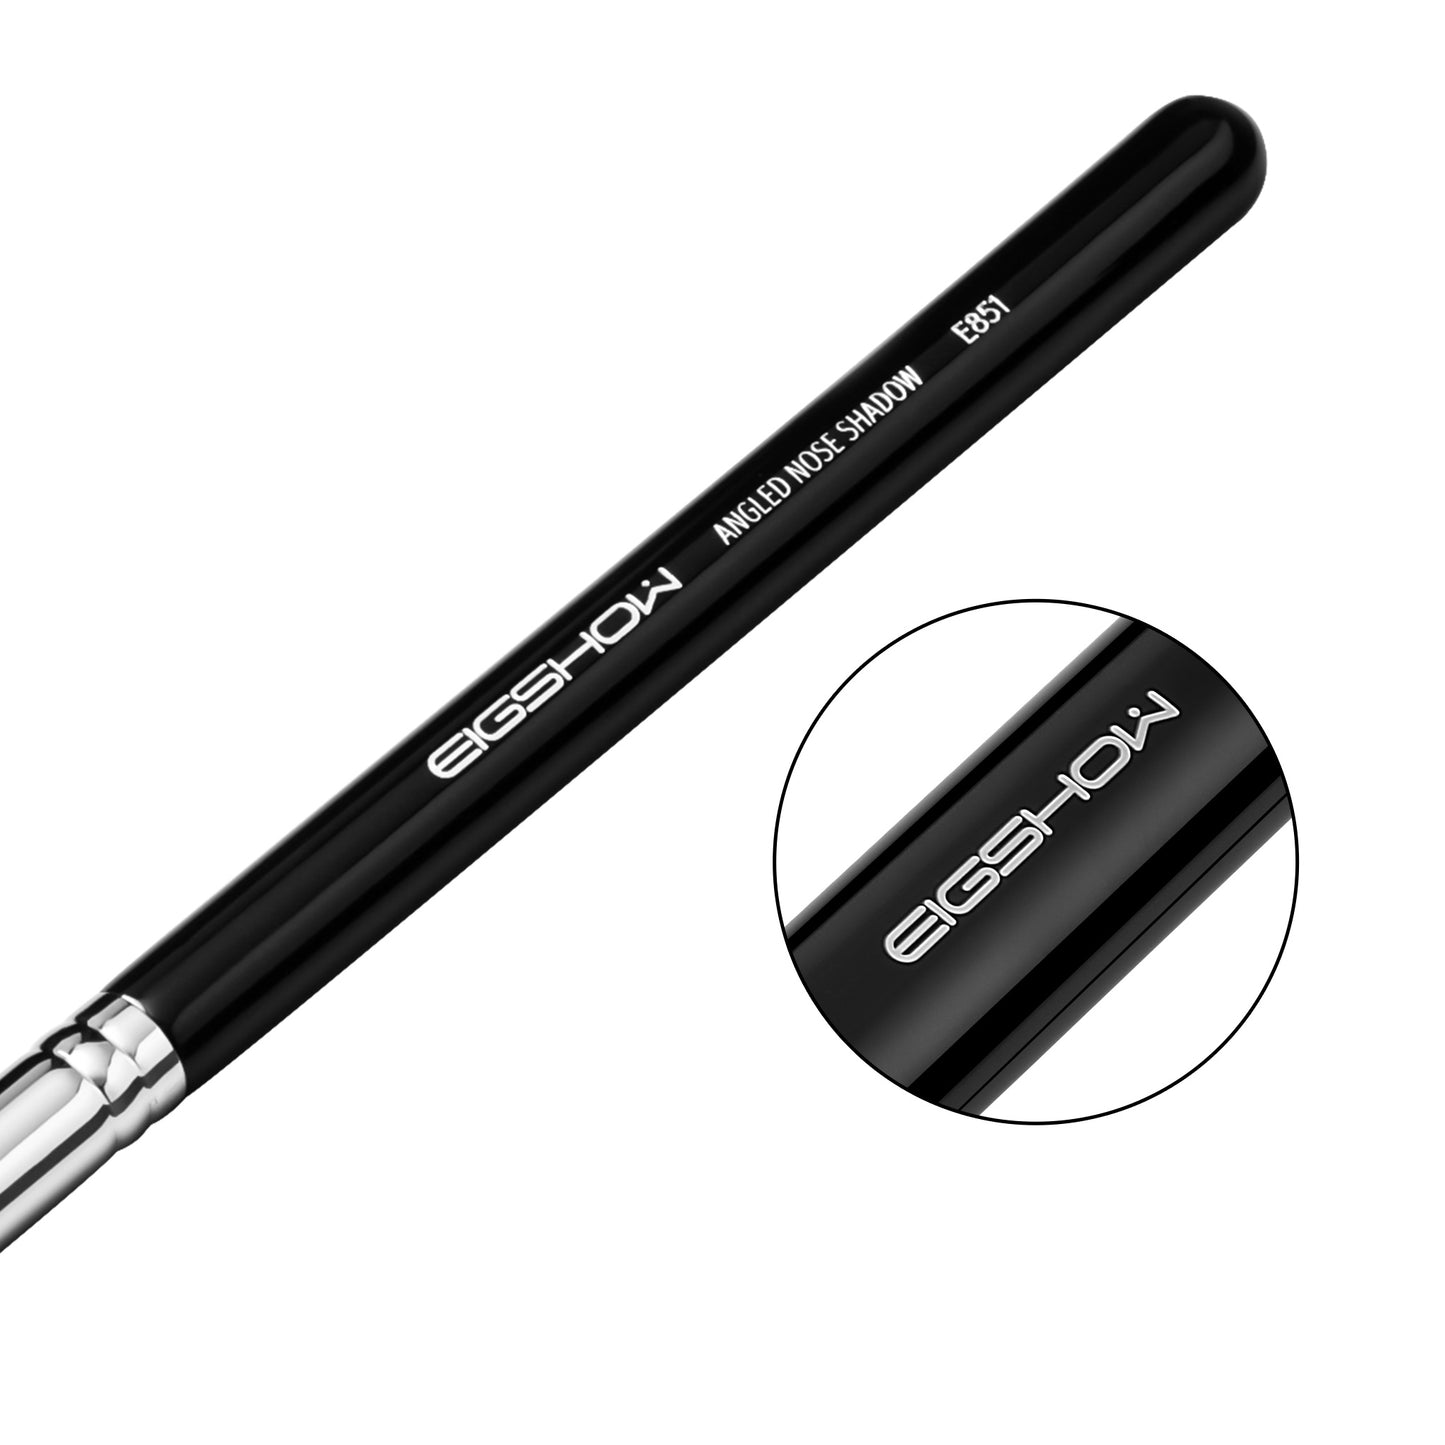 E851 Angled shading brush for contouring the nose